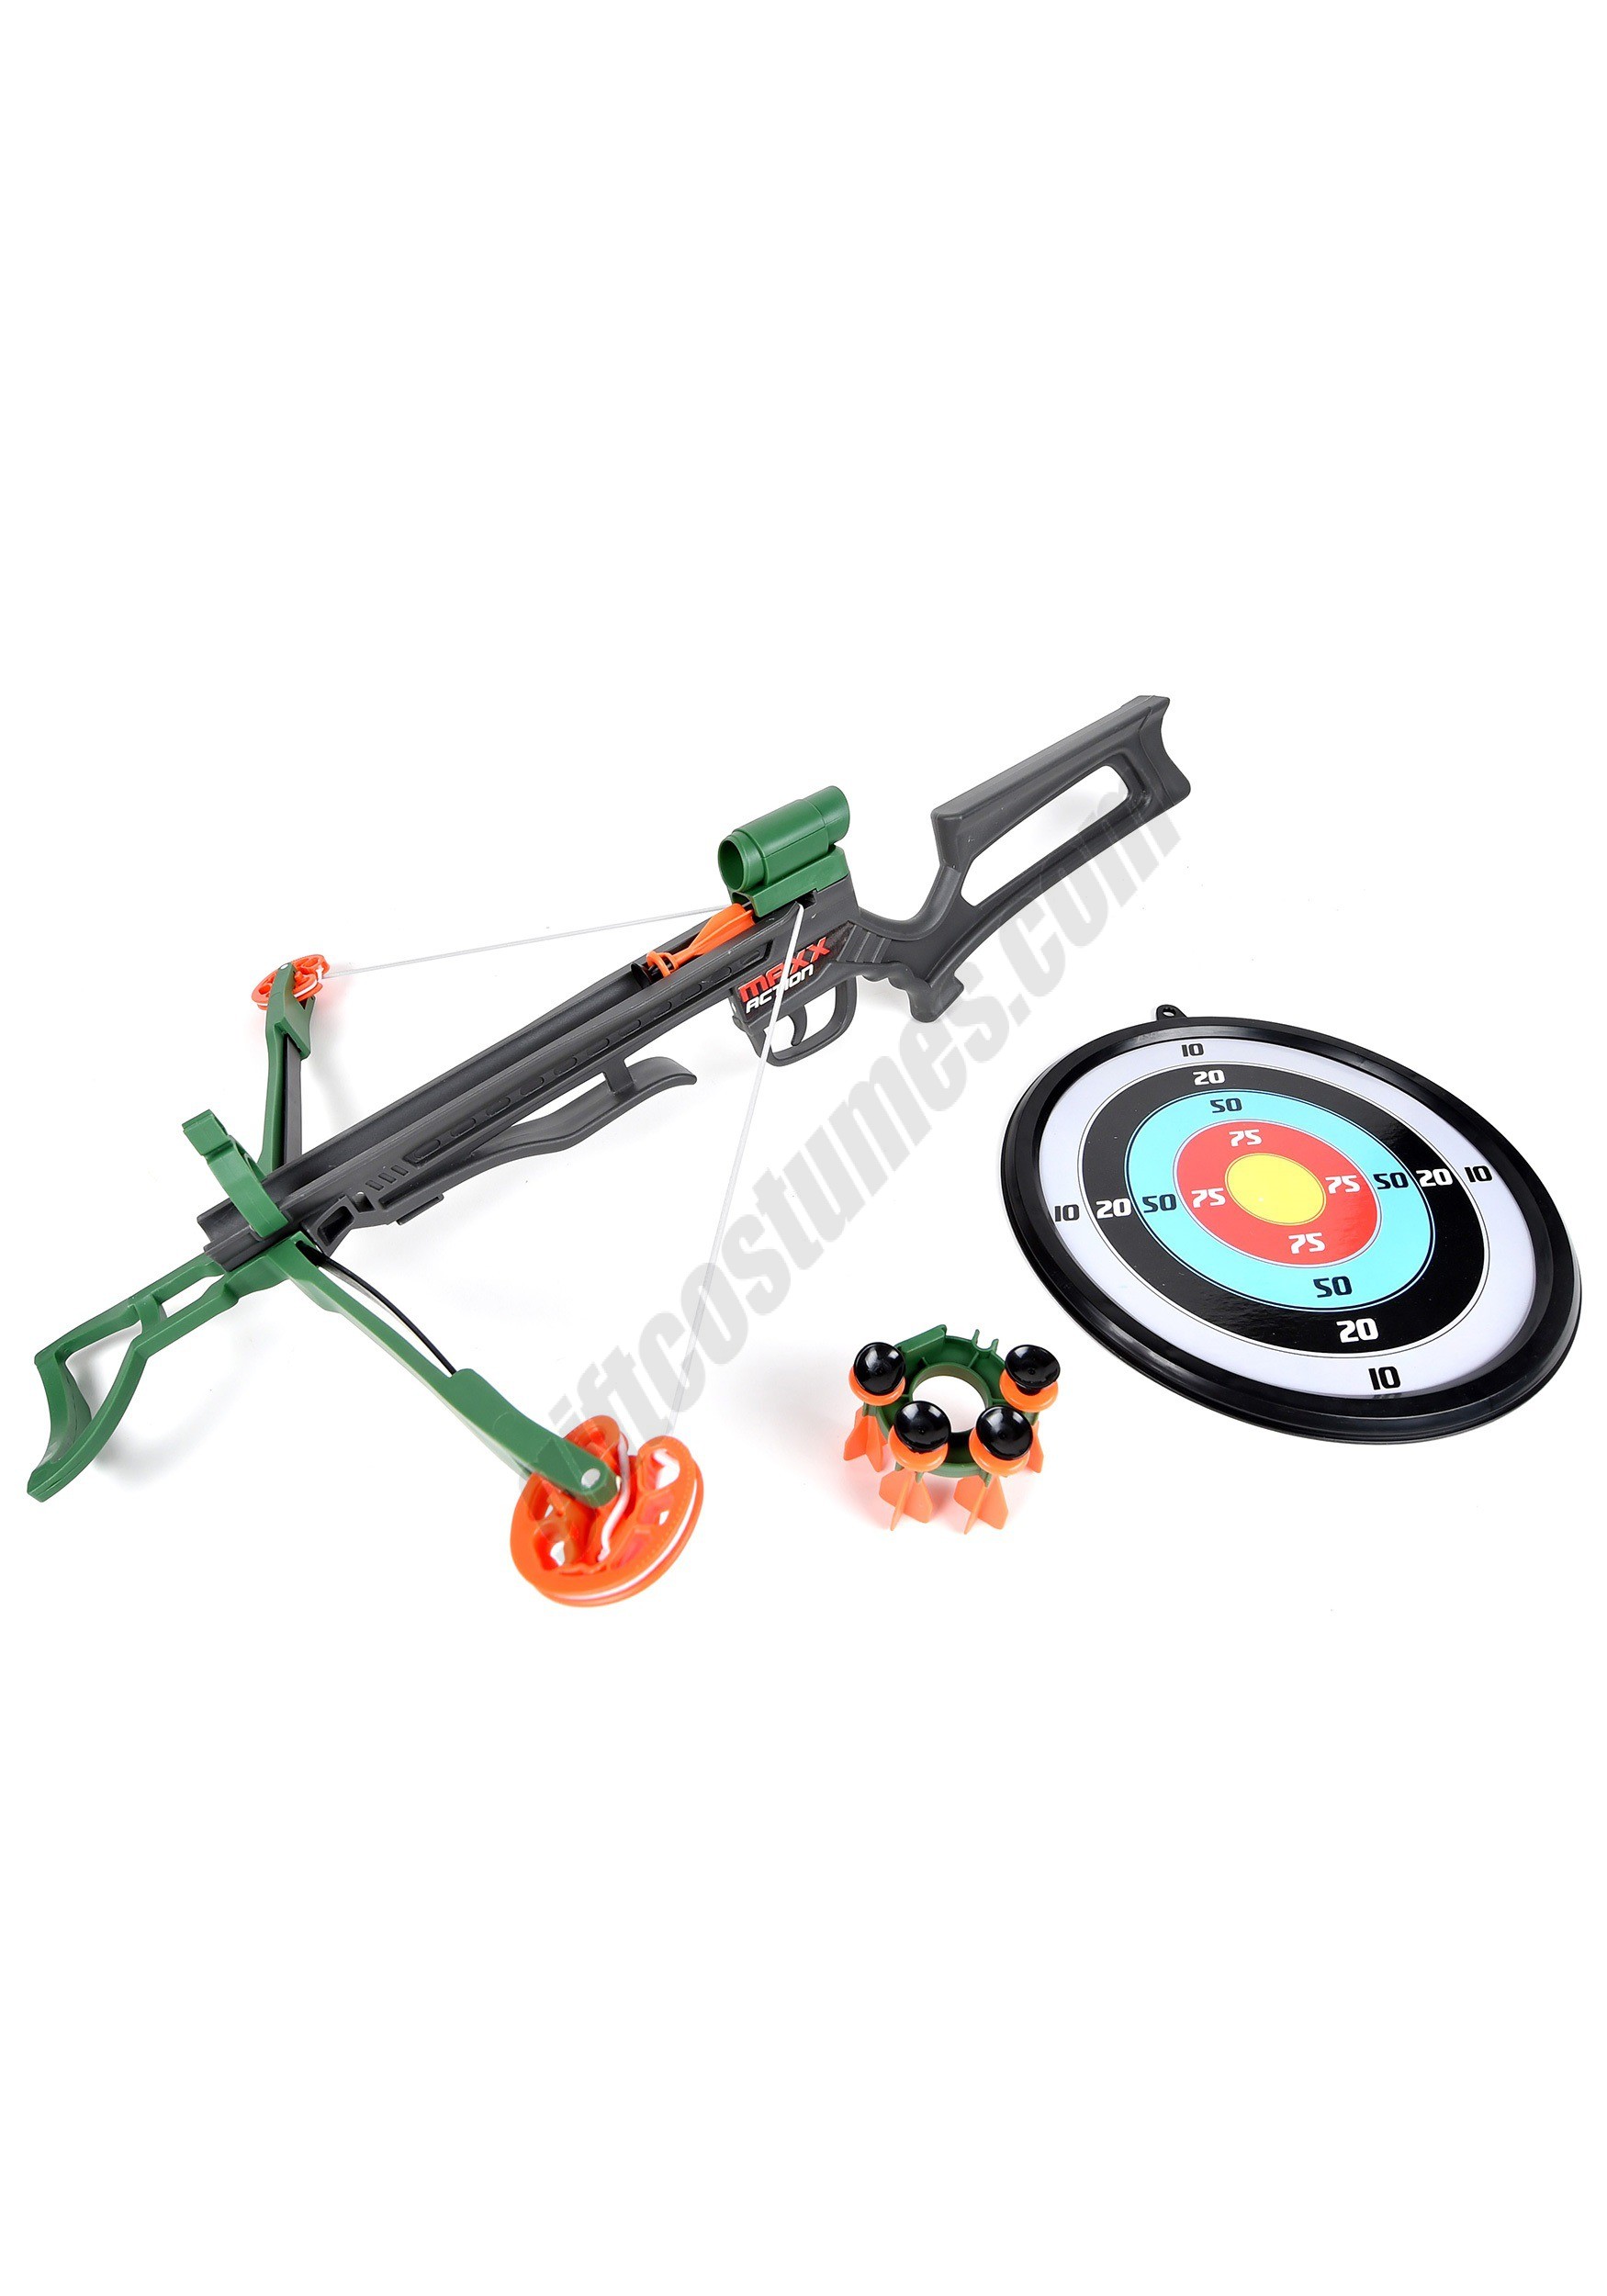 MAXX Action Hunting Series Deluxe Crossbow Accessory Promotions - MAXX Action Hunting Series Deluxe Crossbow Accessory Promotions